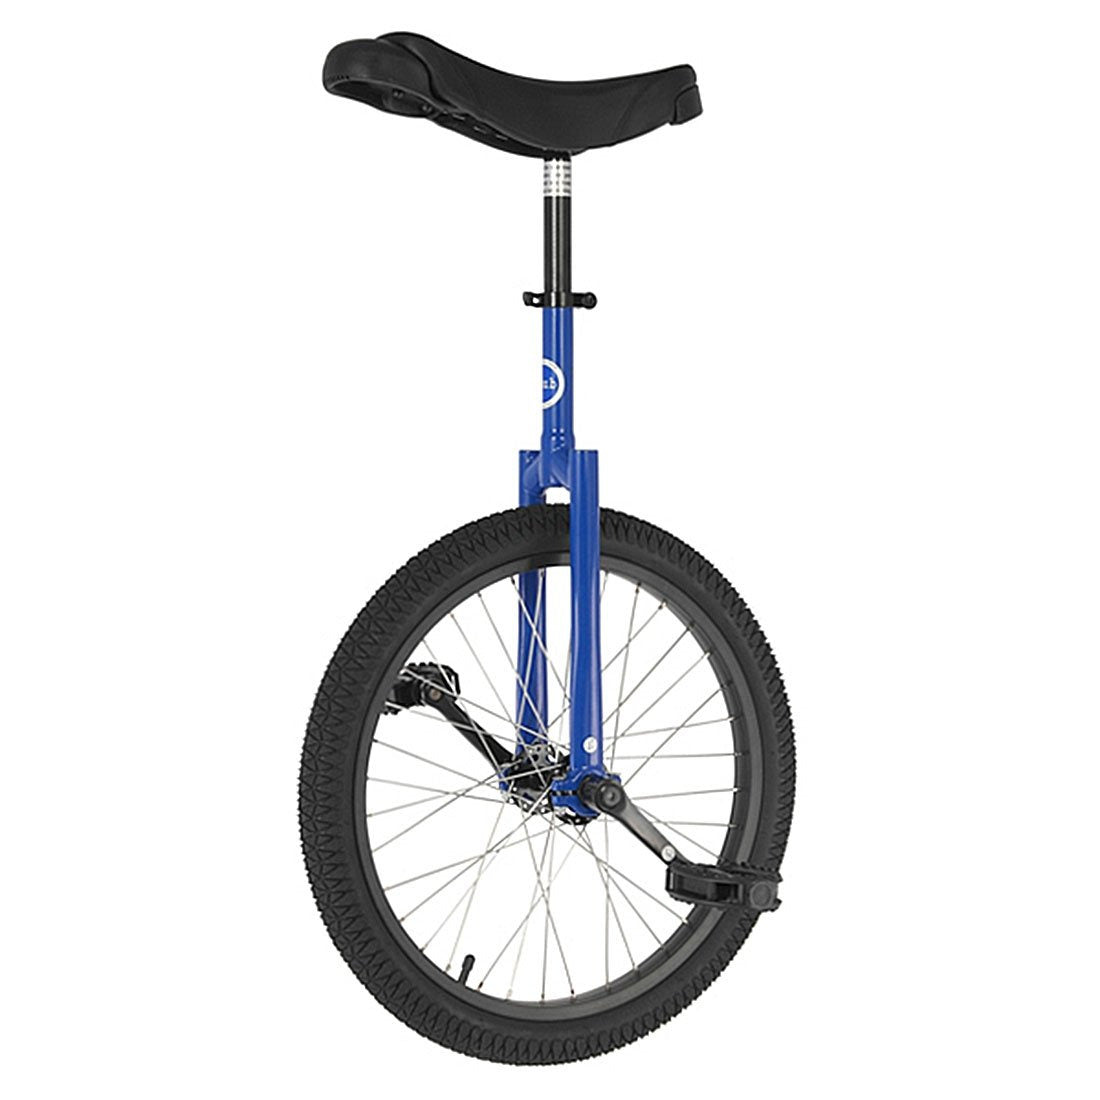 Club Freestyle 20inch Unicycle - Blue/Black Other Fun Toys